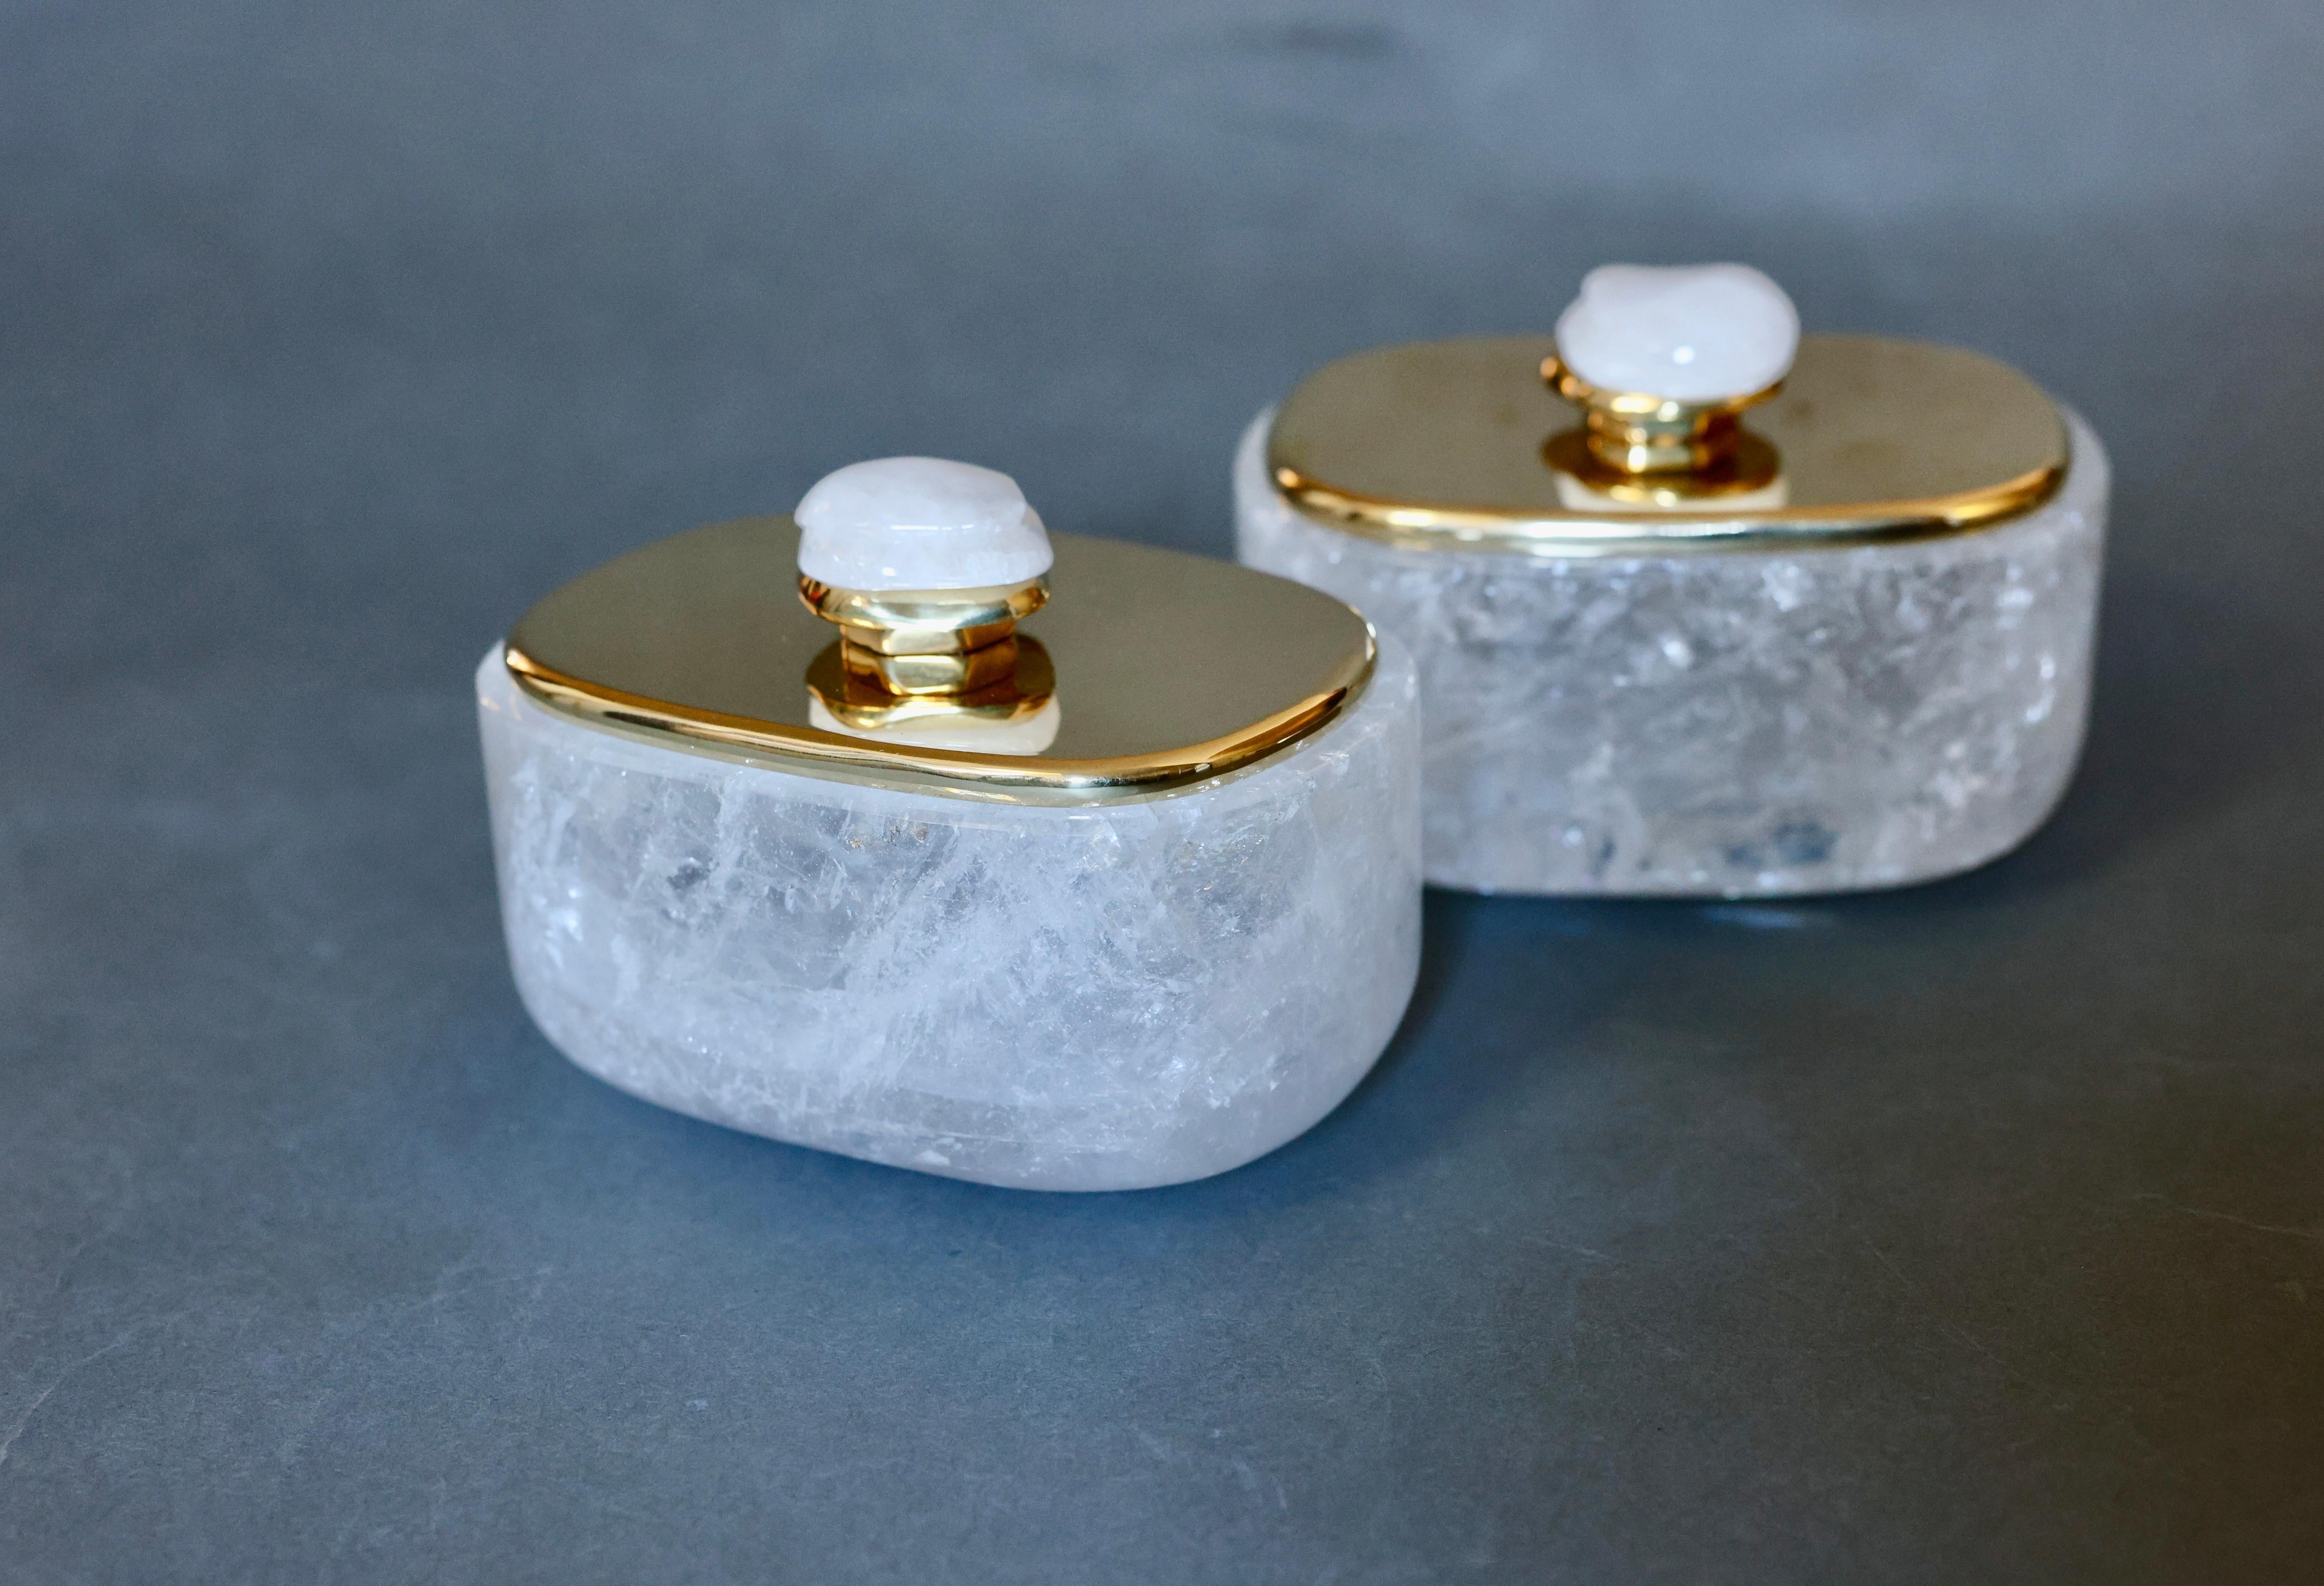 Group of three finely carved rock crystal boxes with polish brass covers,
Measures: 7” x 5” x 5”/ H 
8”x 6” x 5.25”/ H
8.75” x7”x 5.5”/ H.

